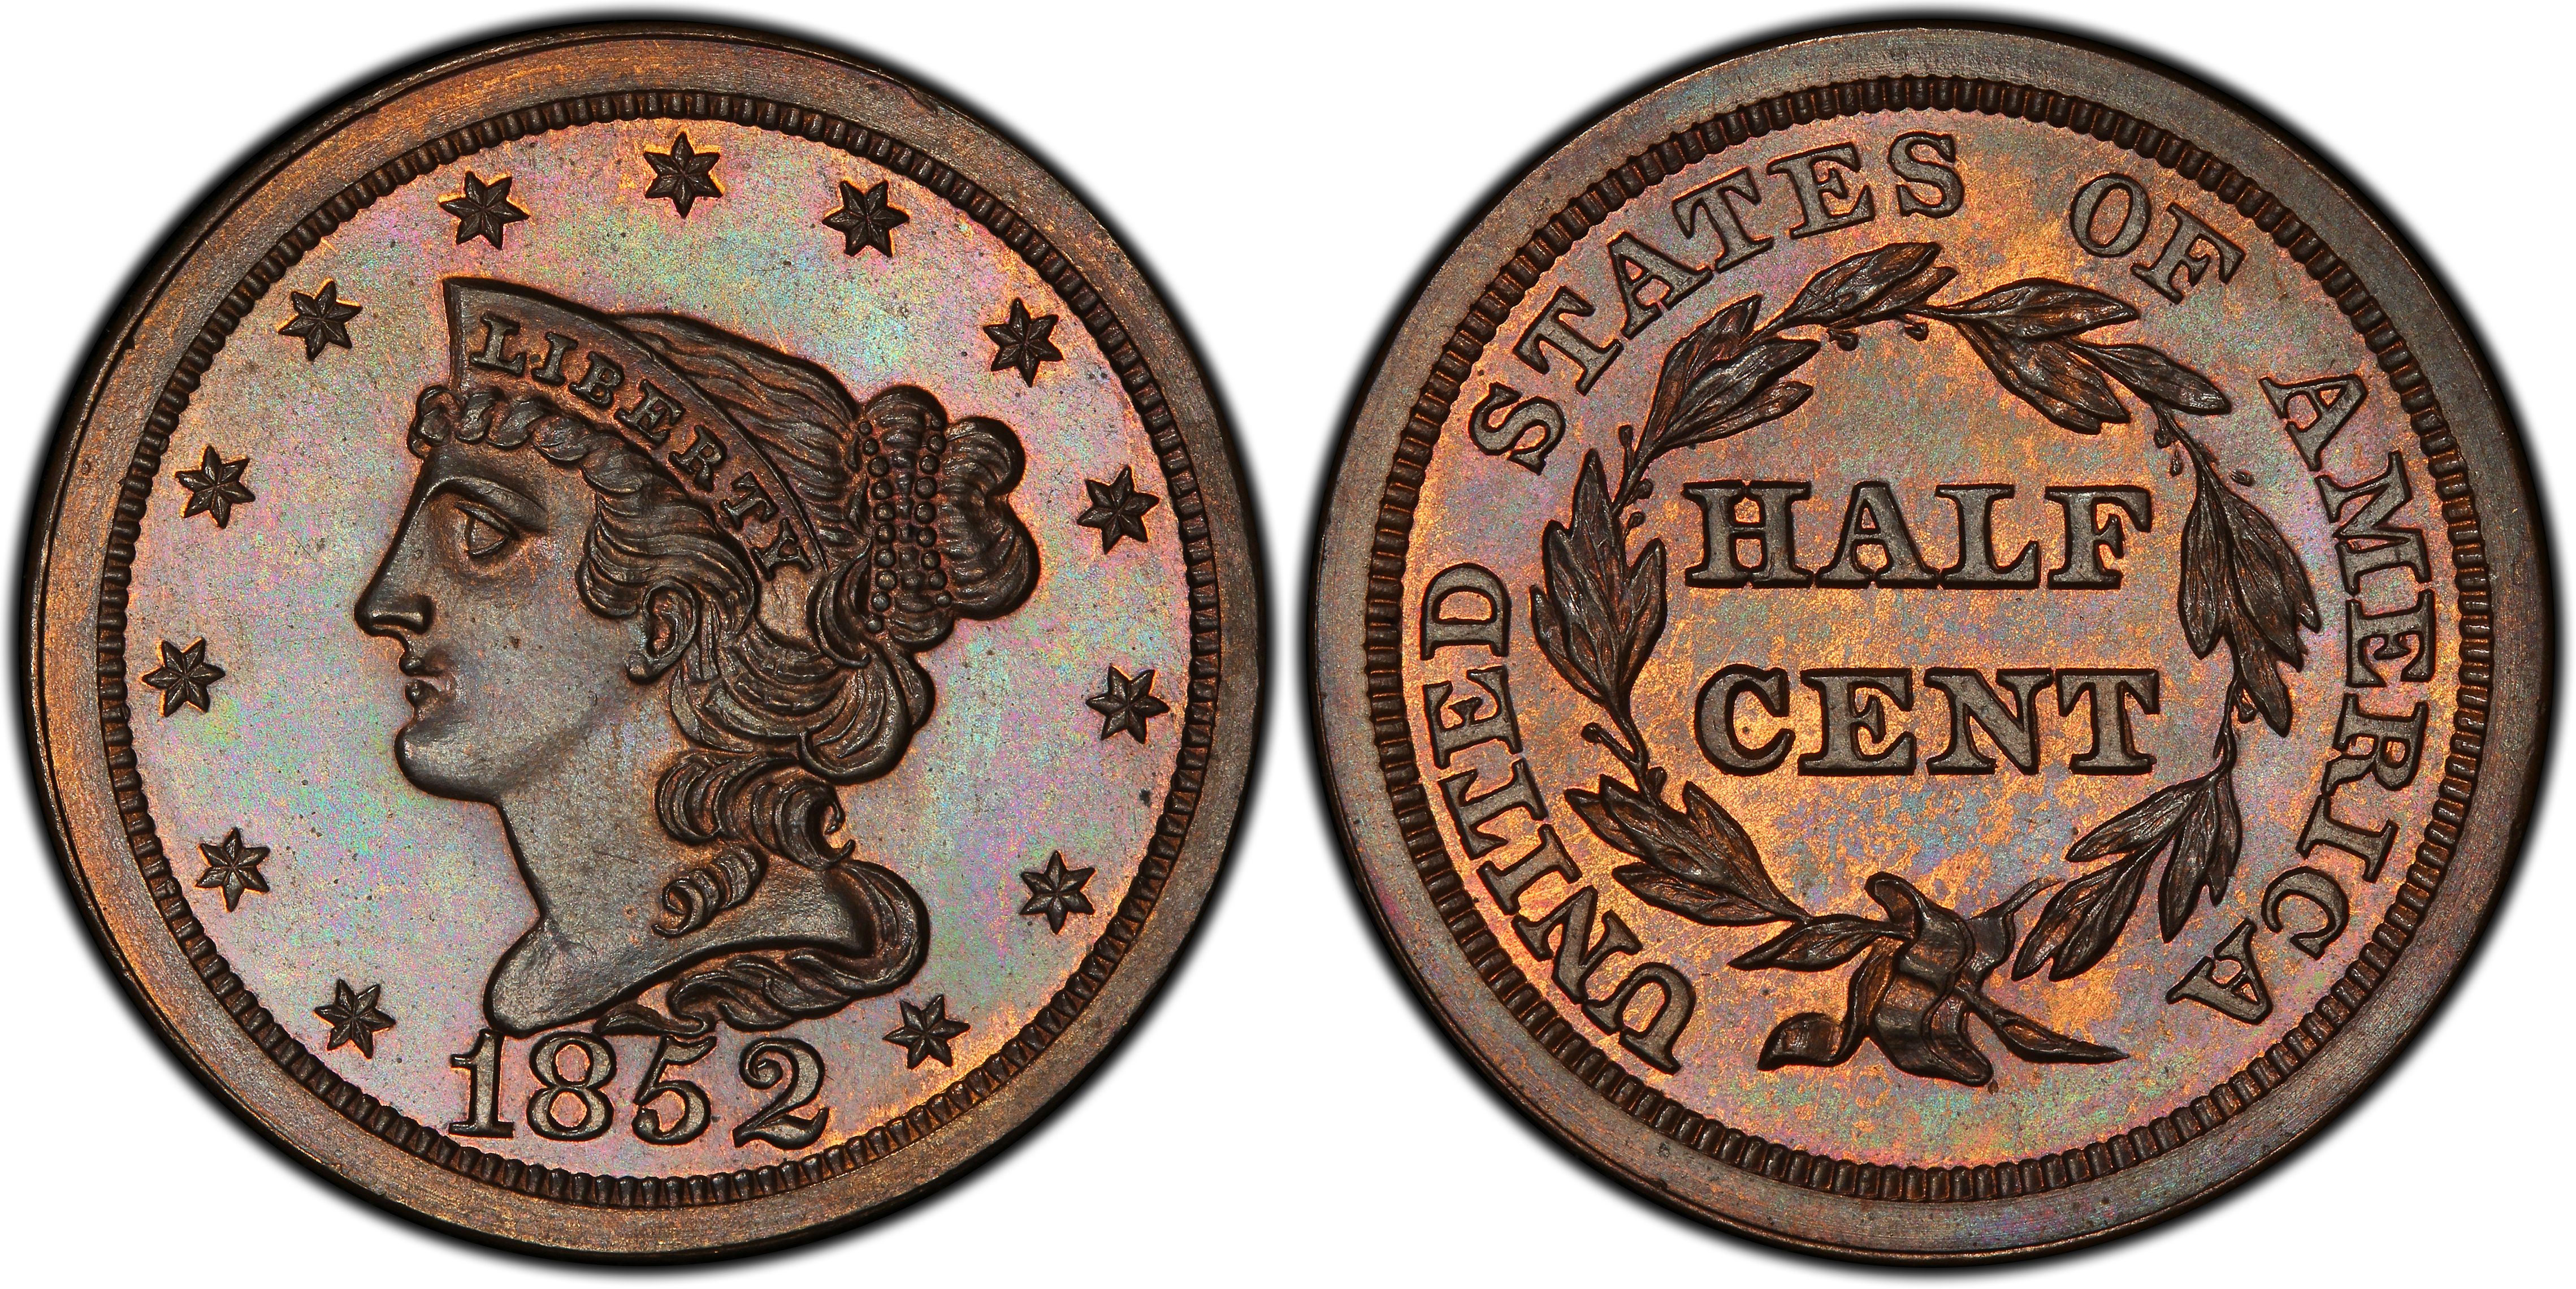 1852 1/2C Restrike, BN (Proof) Braided Hair Half Cent - PCGS CoinFacts